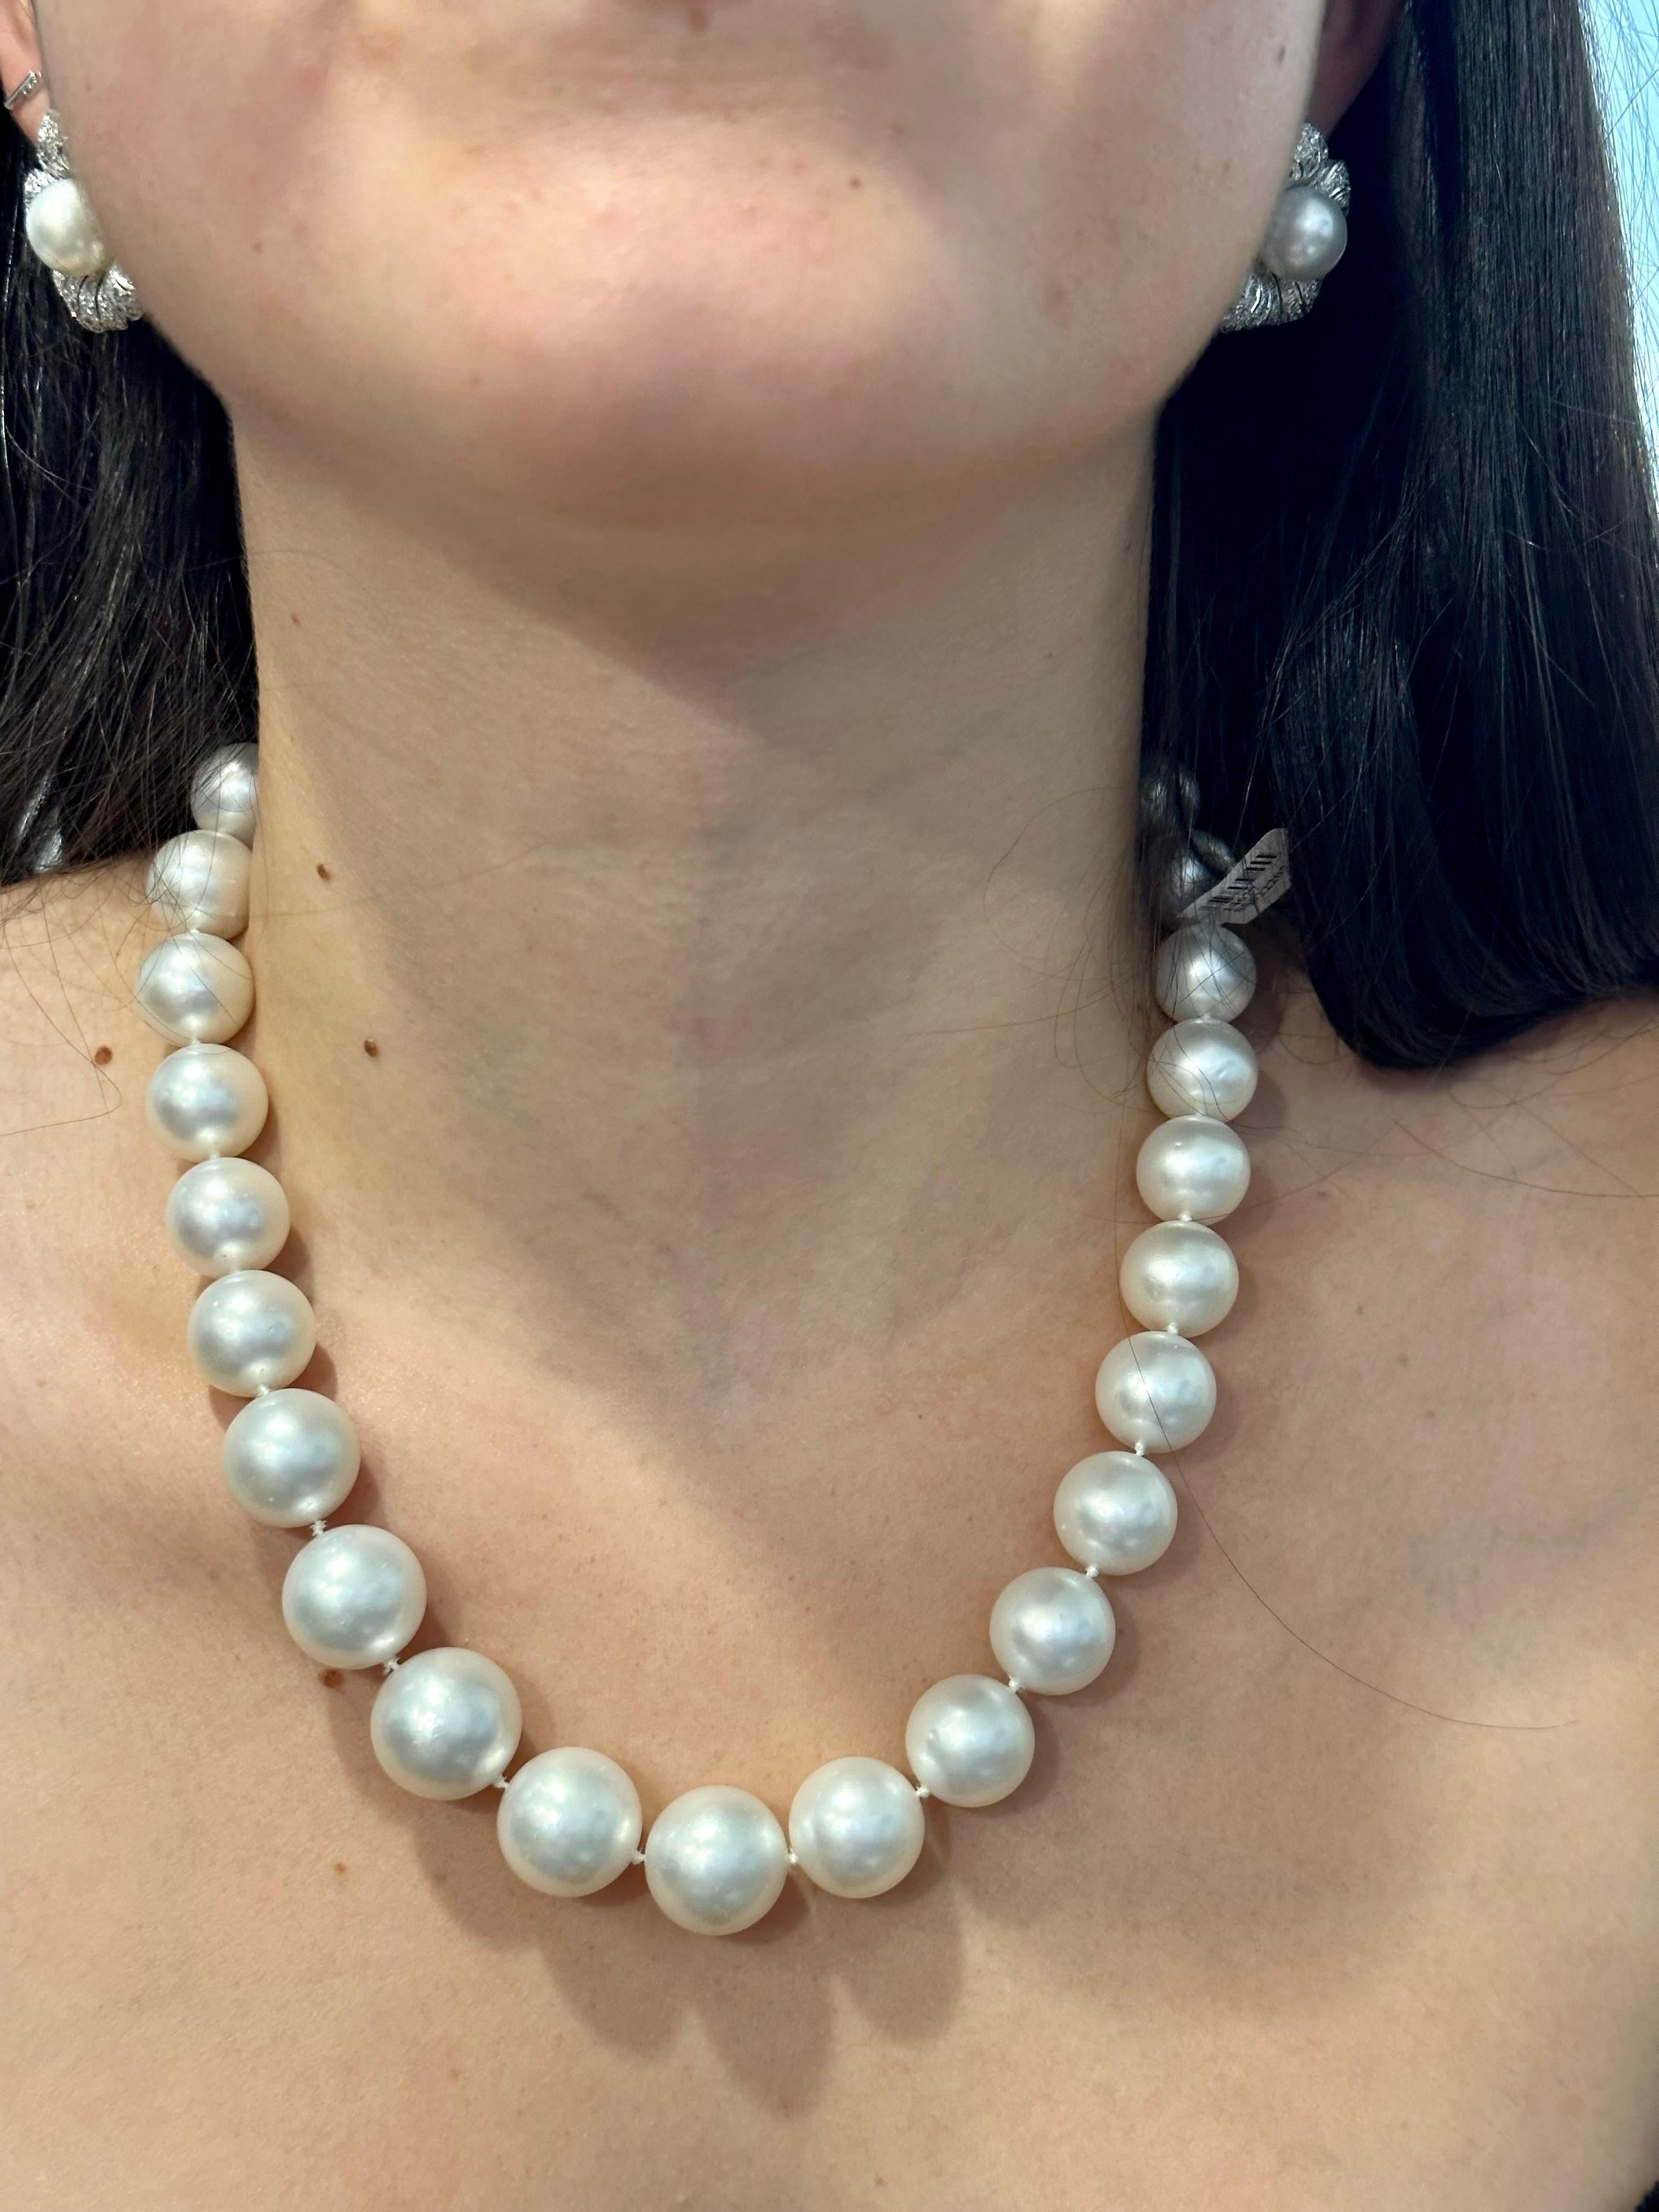 13-16.5mm White South Sea Round Pearl Necklace - AAA Quality, 29 Pieces +Diamond For Sale 6